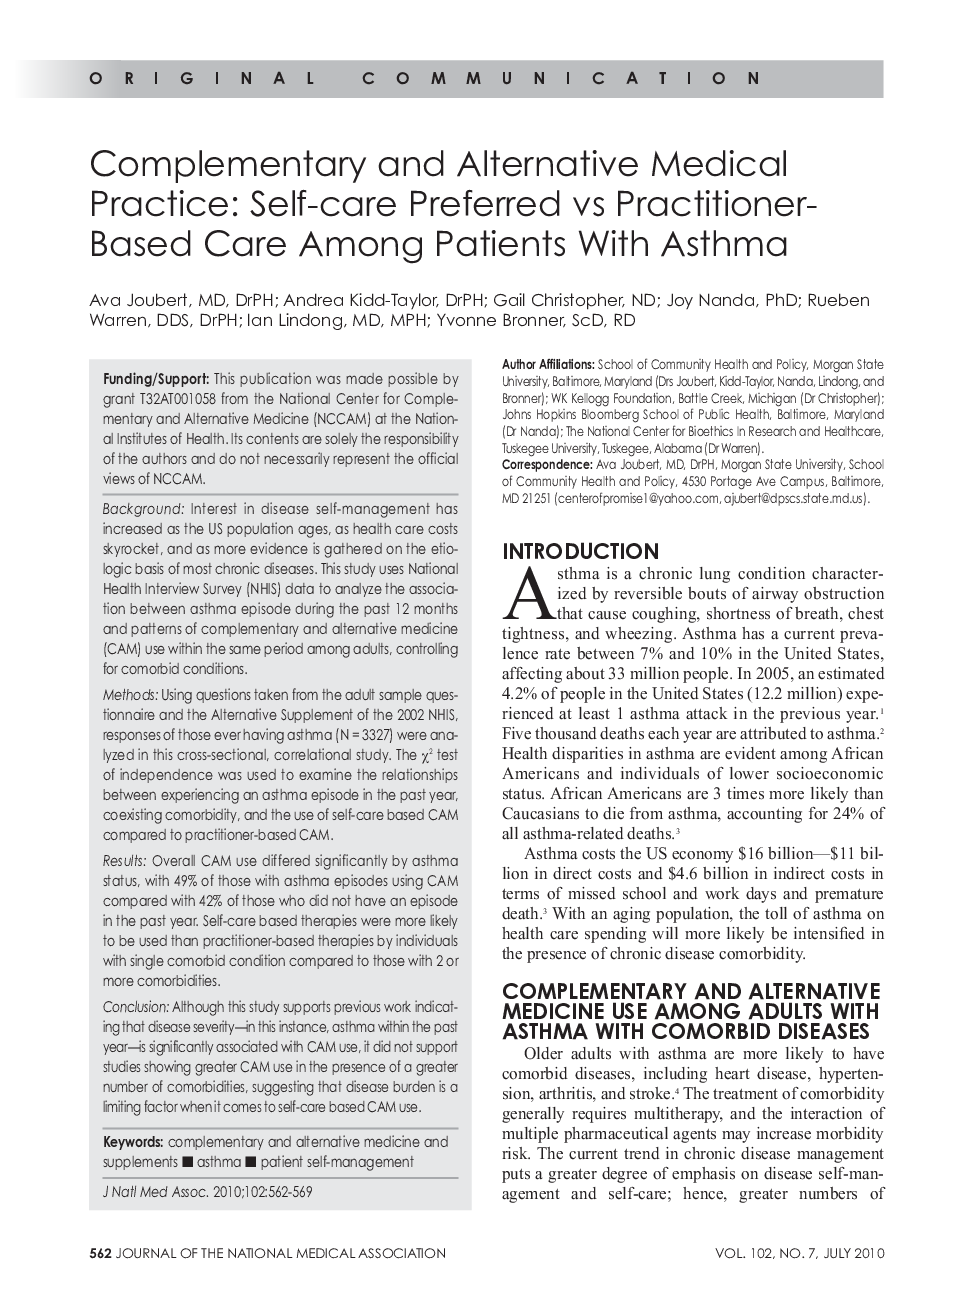 Complementary and Alternative Medical Practice: Self-care Preferred vs Practitioner-Based Care Among Patients With Asthma